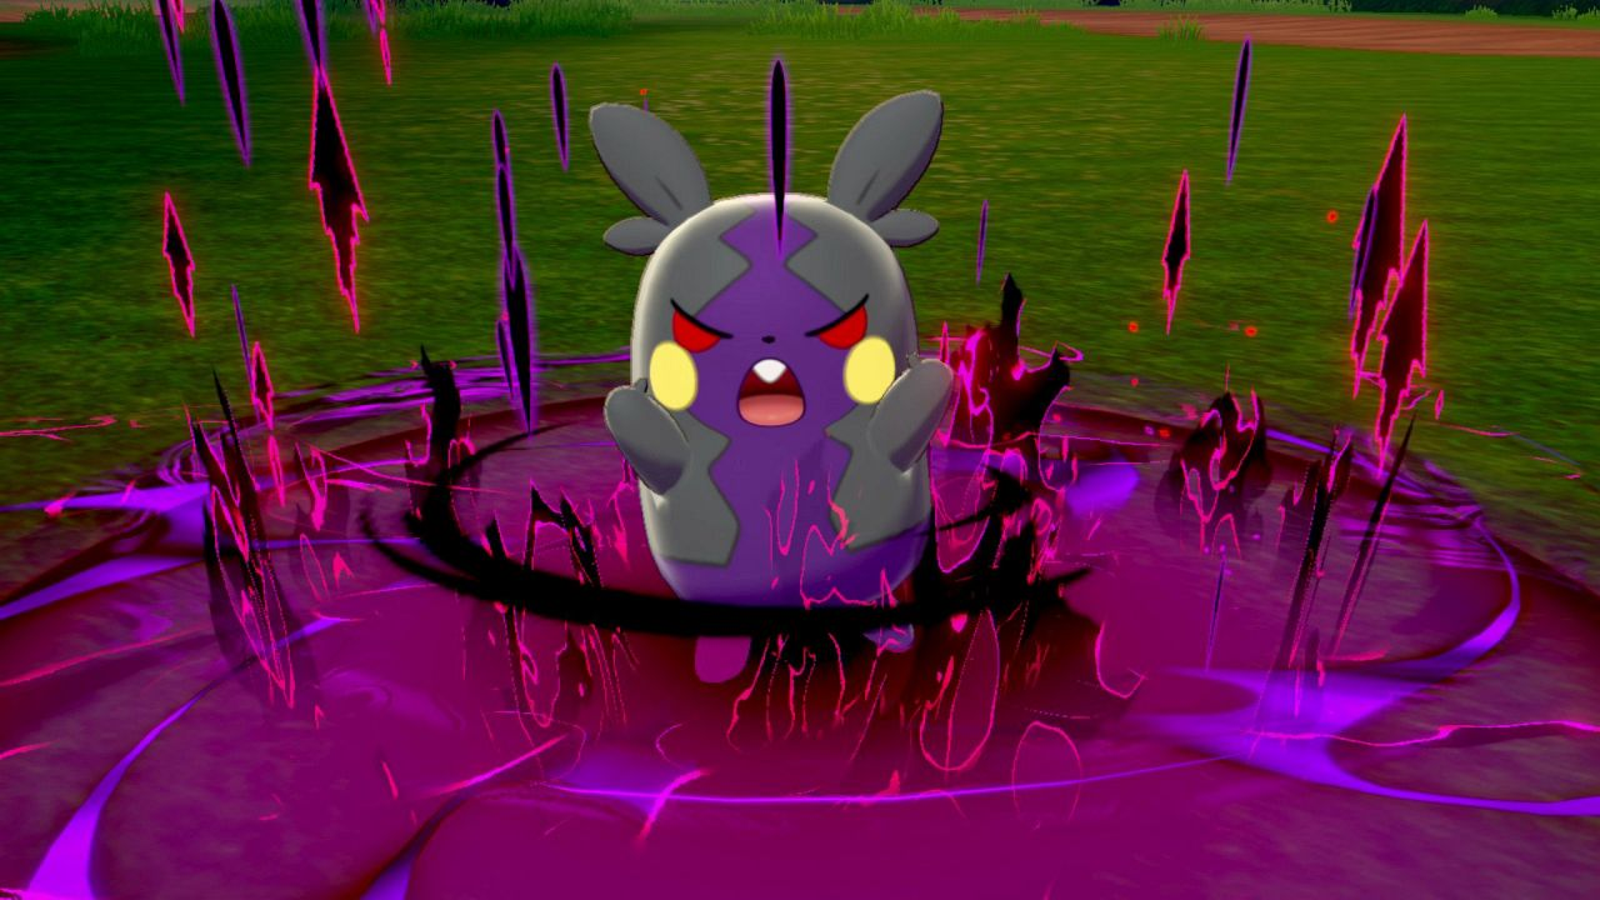 Pokémon Sword and Shield hands-on preview – gigantic fun